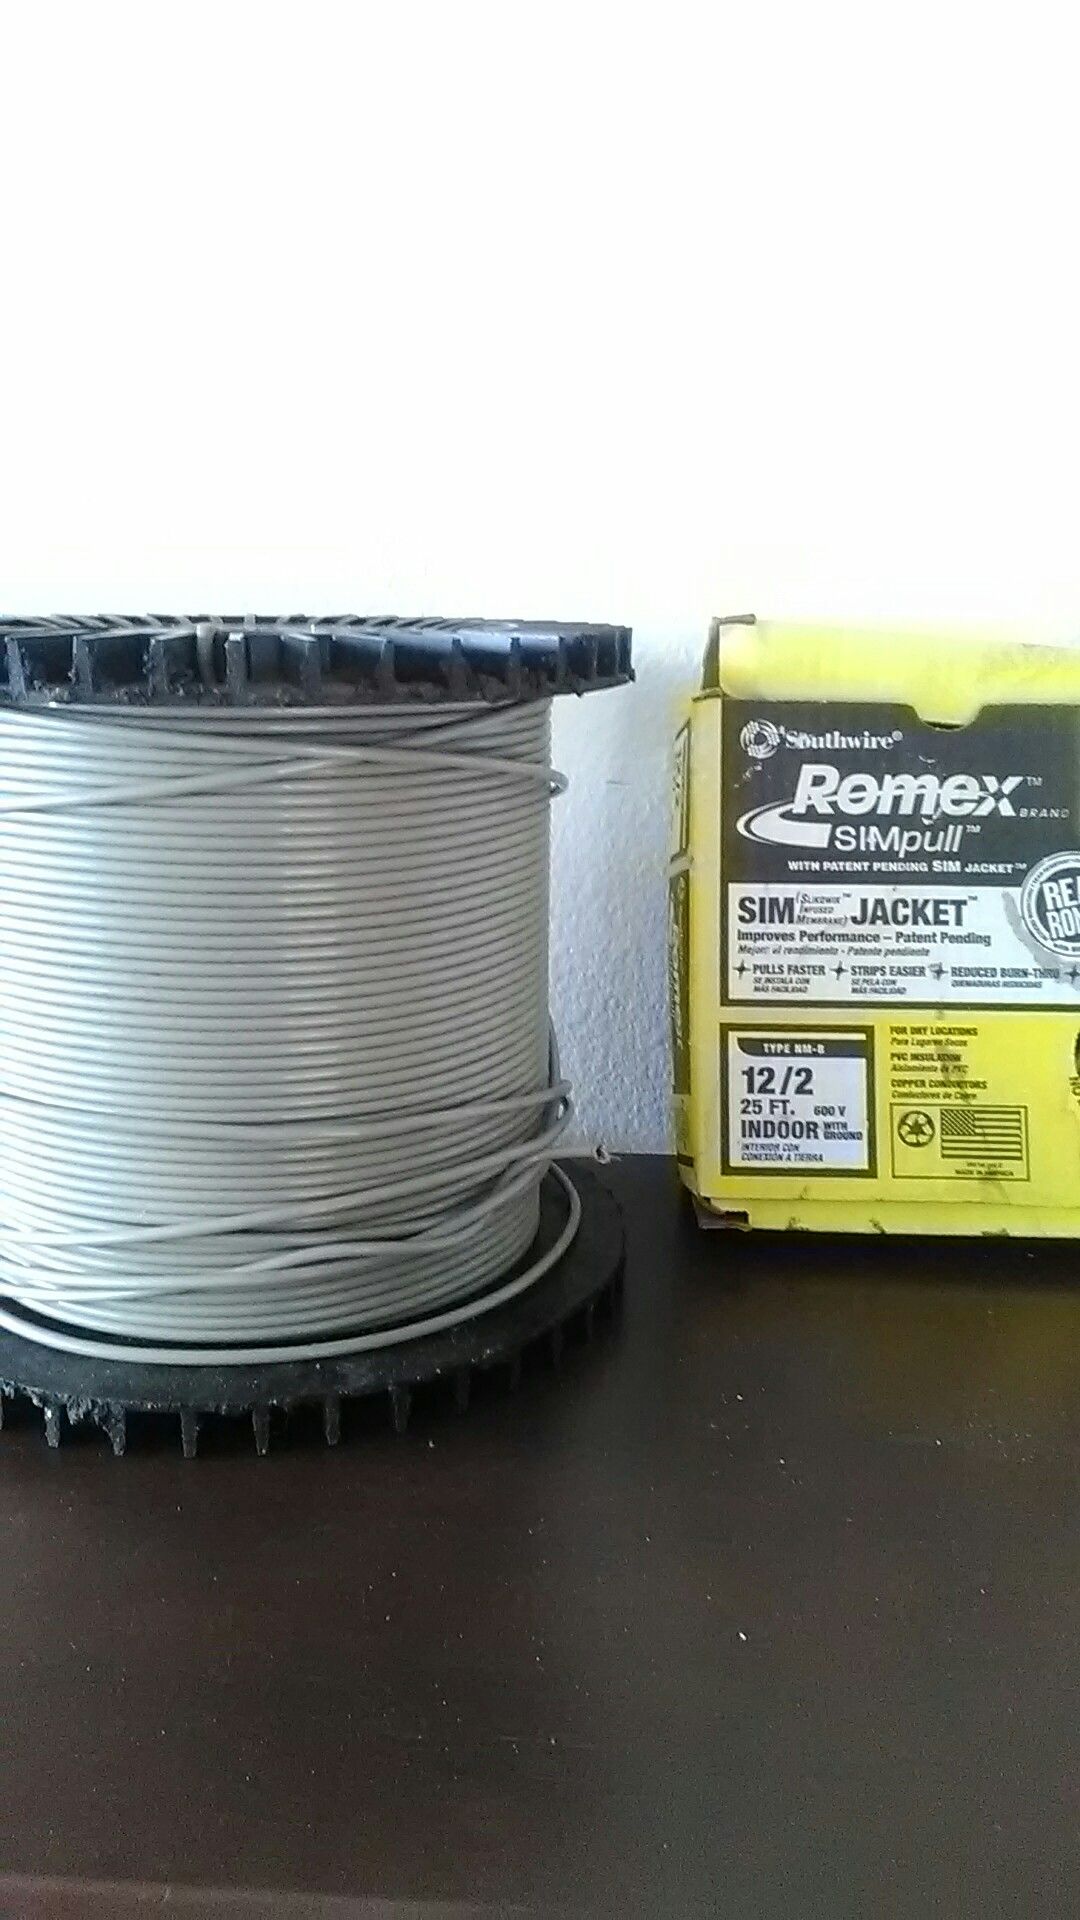 25ft 12/2 Indoor Electrical Wiring with Ground and 410 ft Speaker Wire